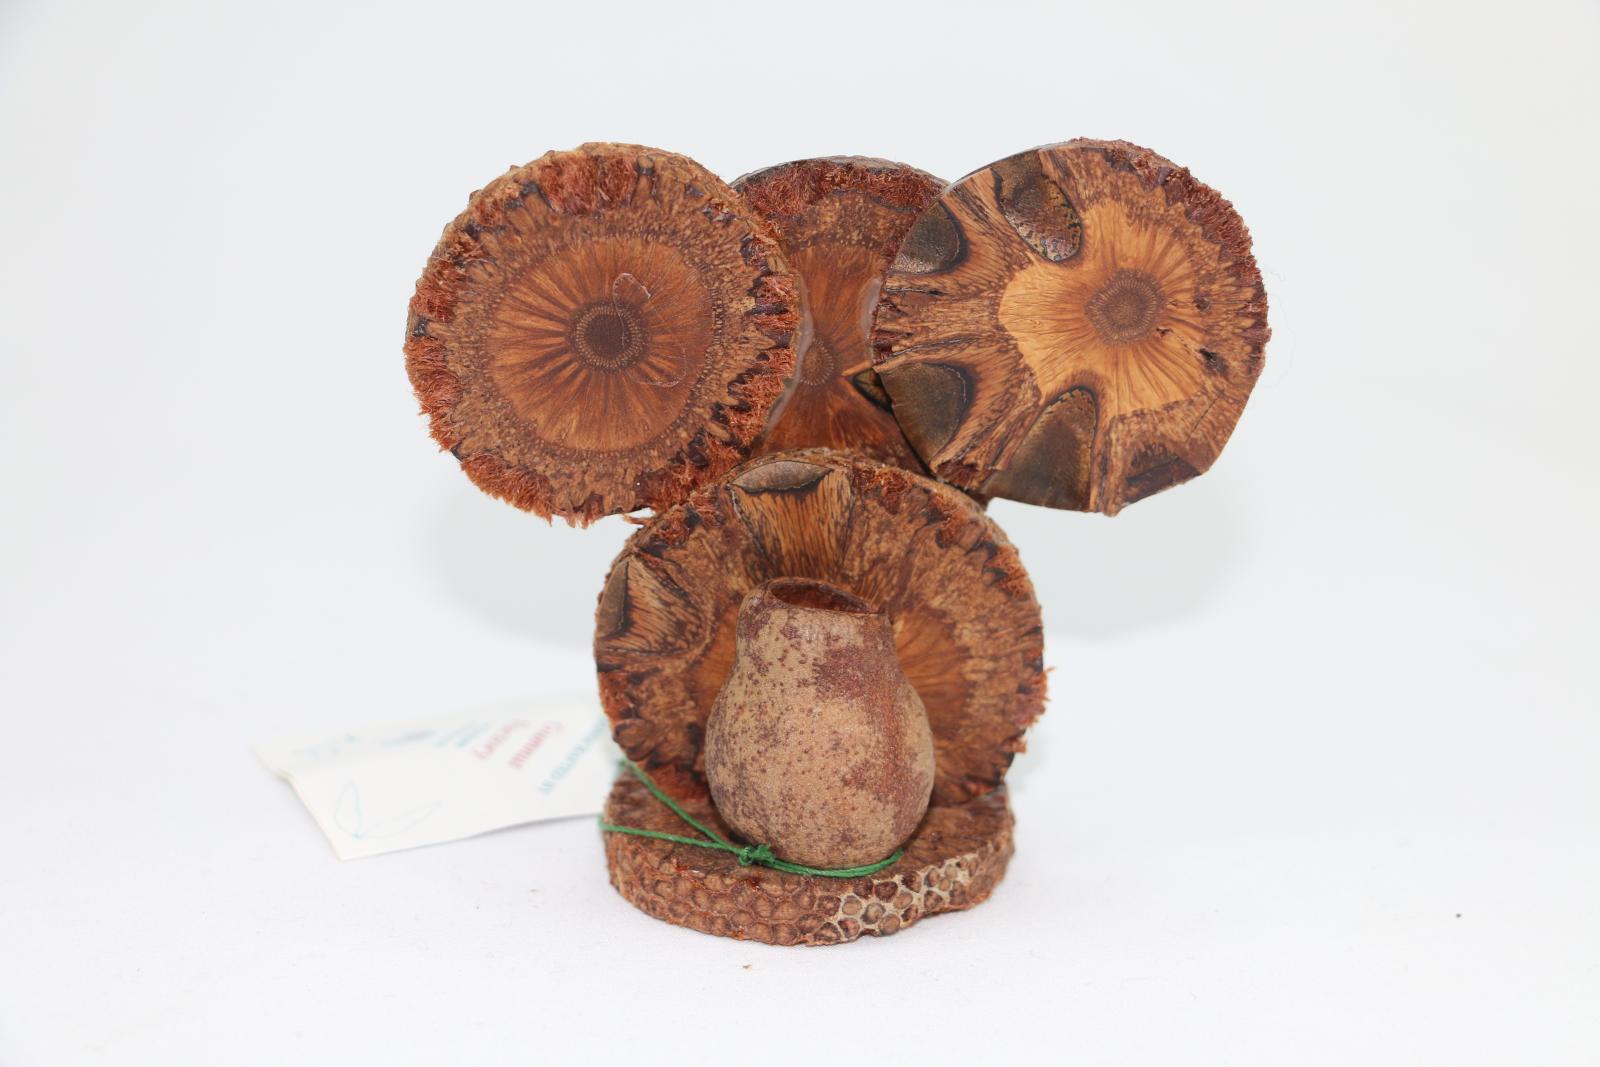 Nut styled Koala glued together with cross-cut sections of banksia in shape of a Koala with seed pods for nose and eyes and feet. A gum nut is located at back of figurine. The object is clear-varnished. Label attached to figurine with cord.